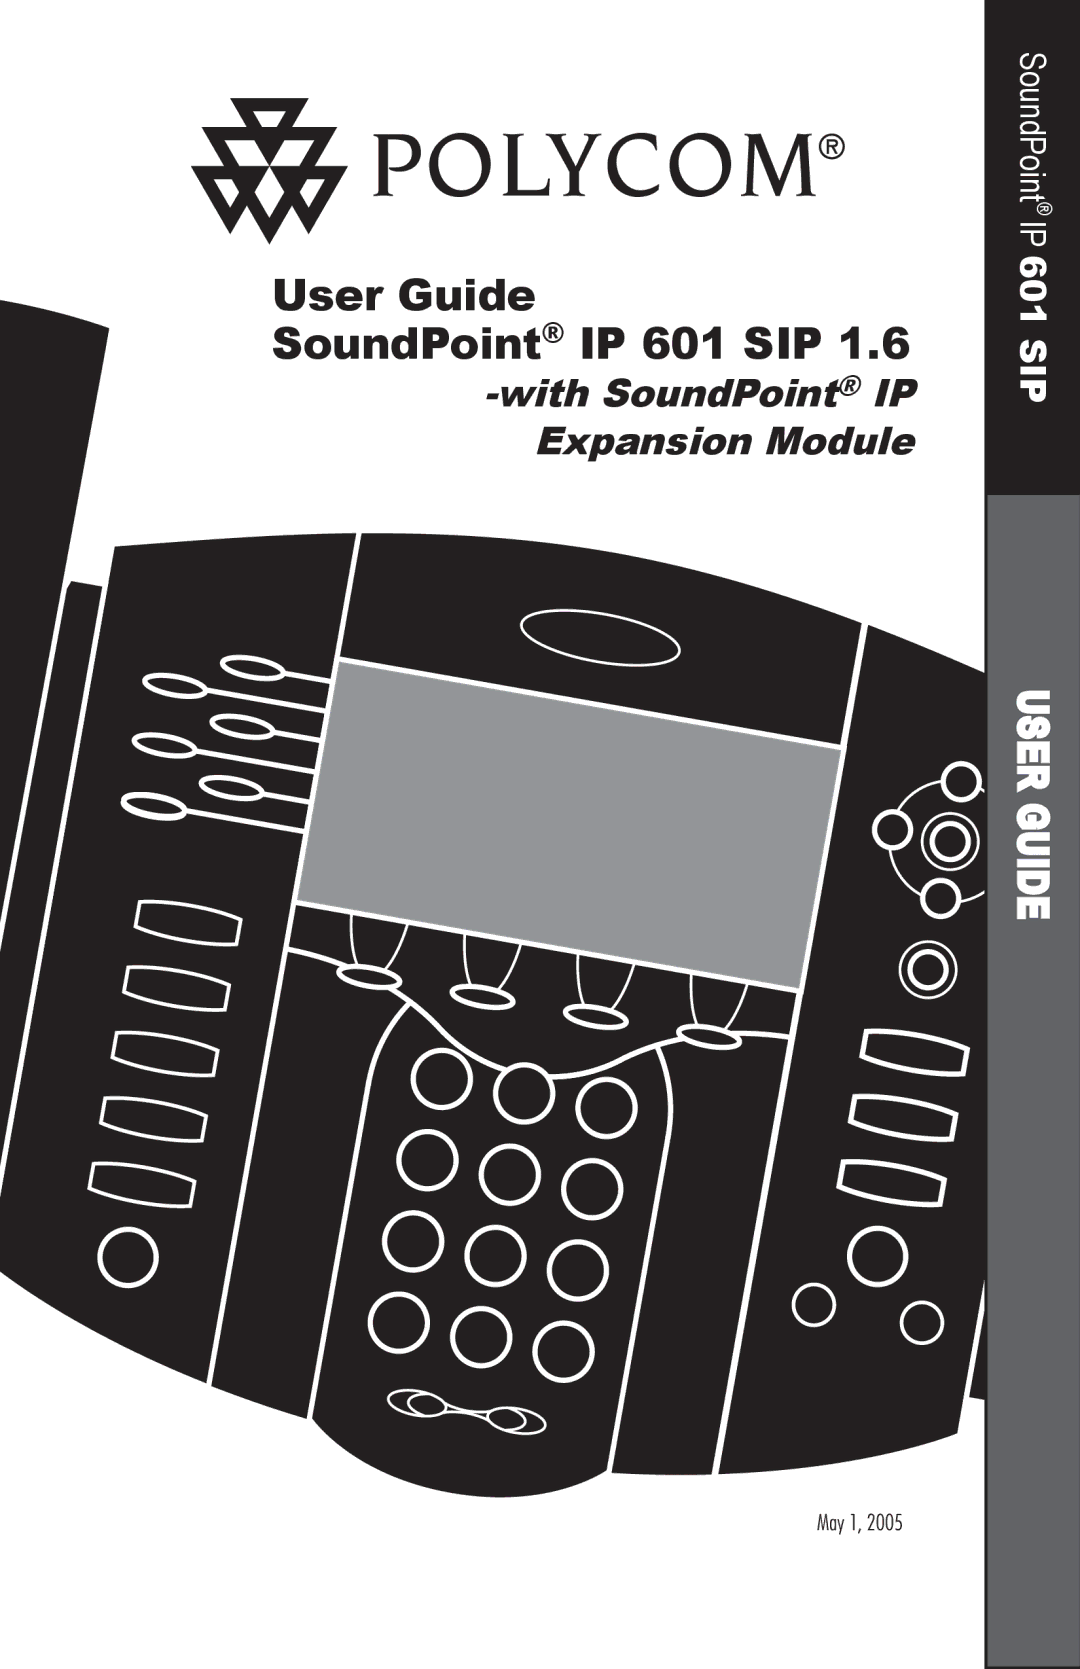 Polycom manual User Guide SoundPoint IP 601 SIP 